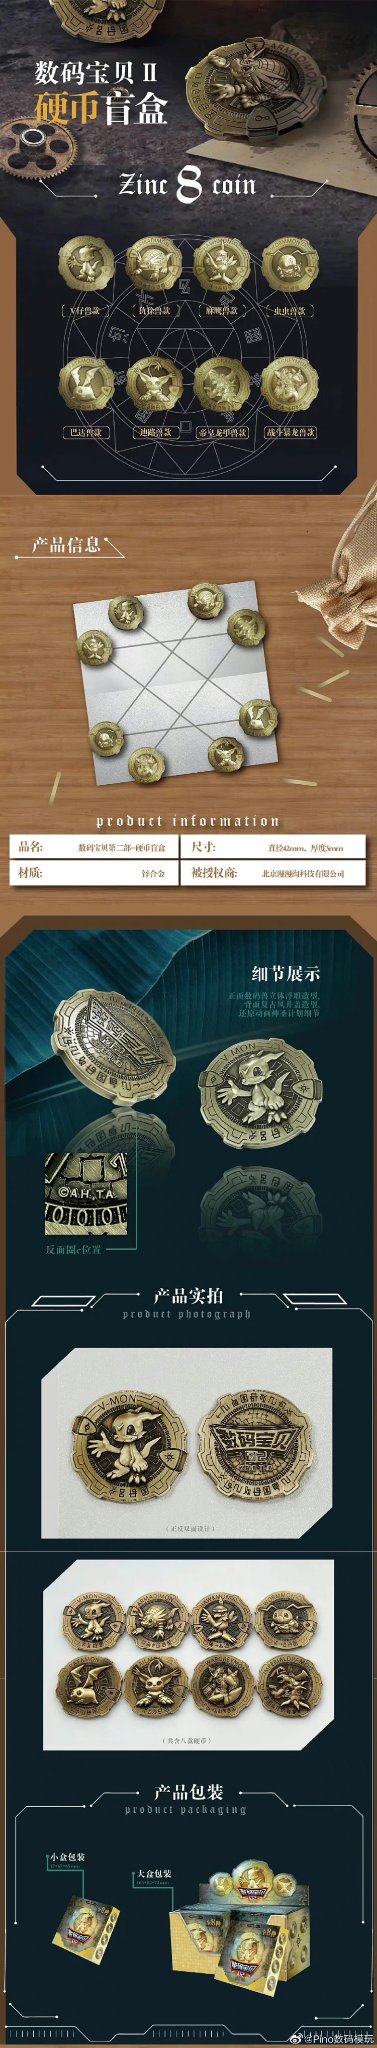 chinese02coins_march18_2023.jpg